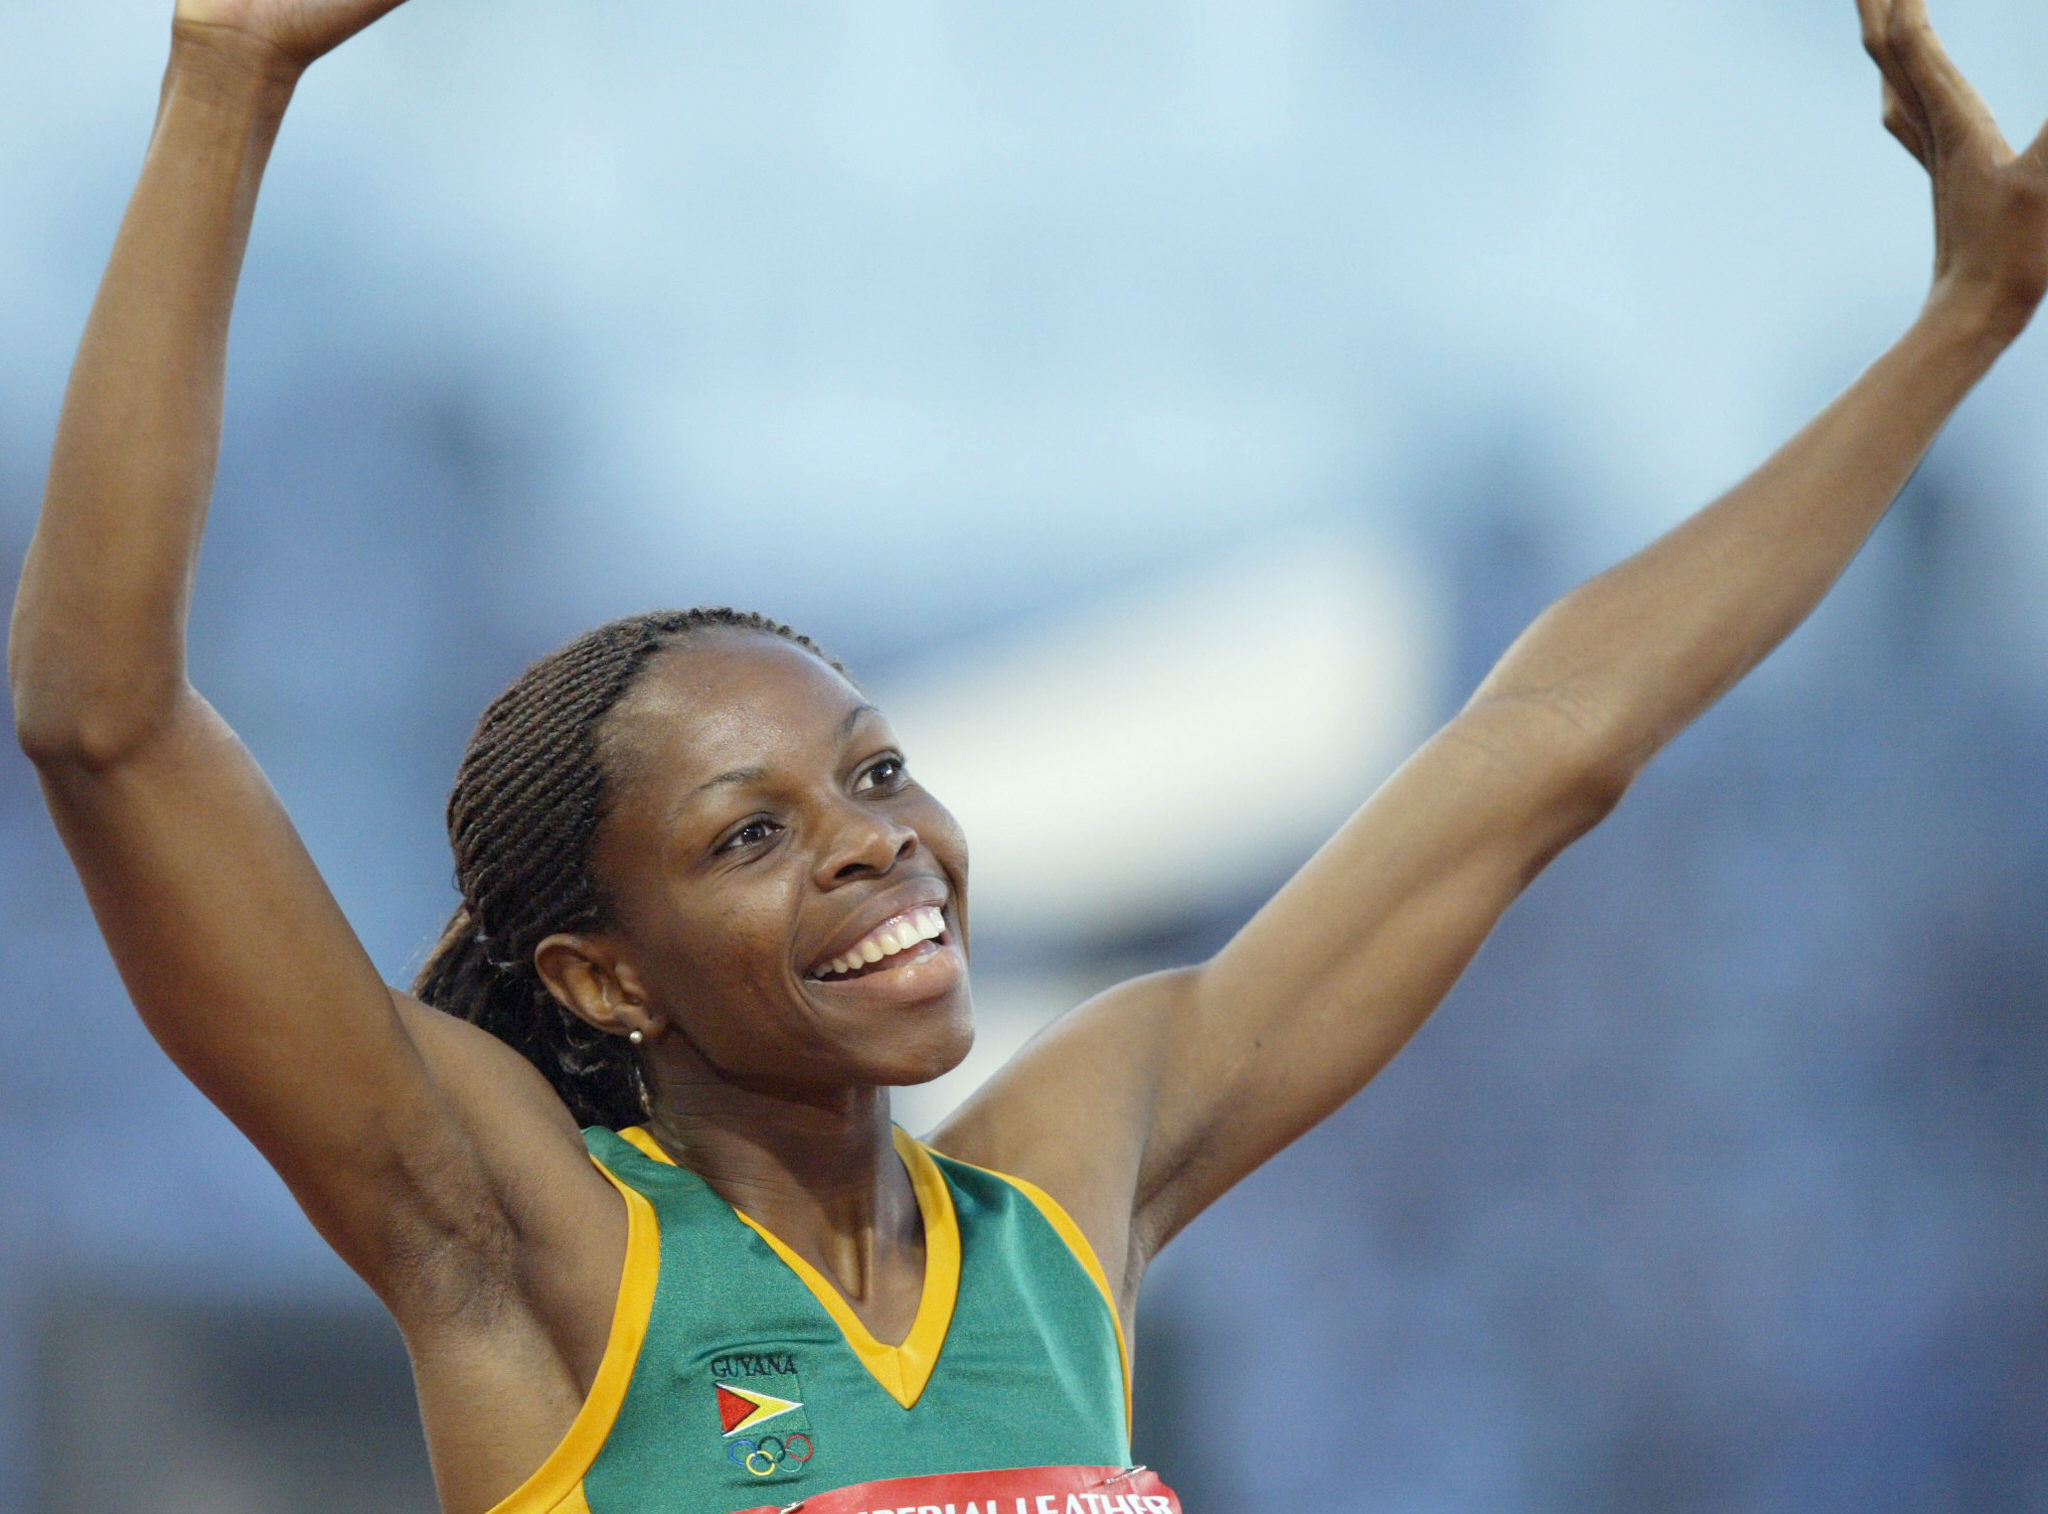 Aliann Pompey won the 400 metres title for Guyana at Manchester 2002 ©Getty Images